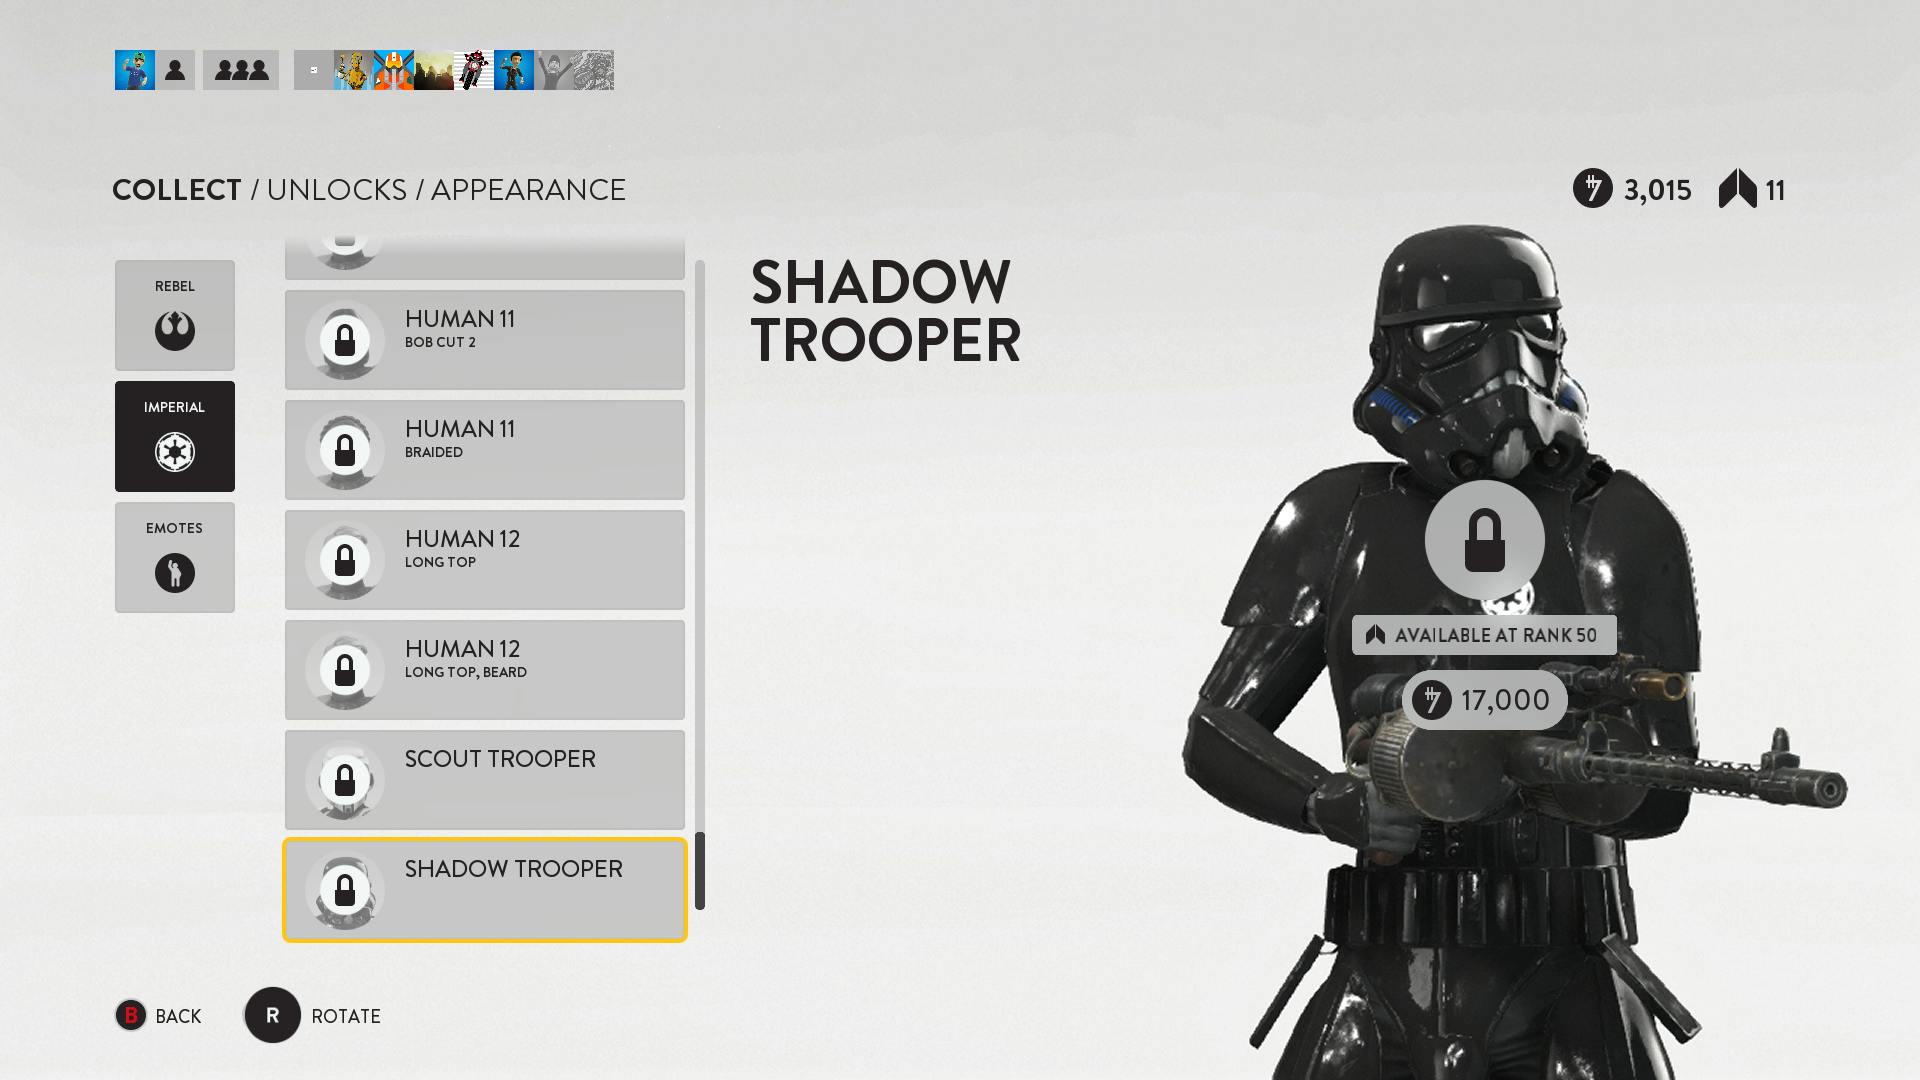 Why is the only cool customization option for Imperial soldiers the very last one?